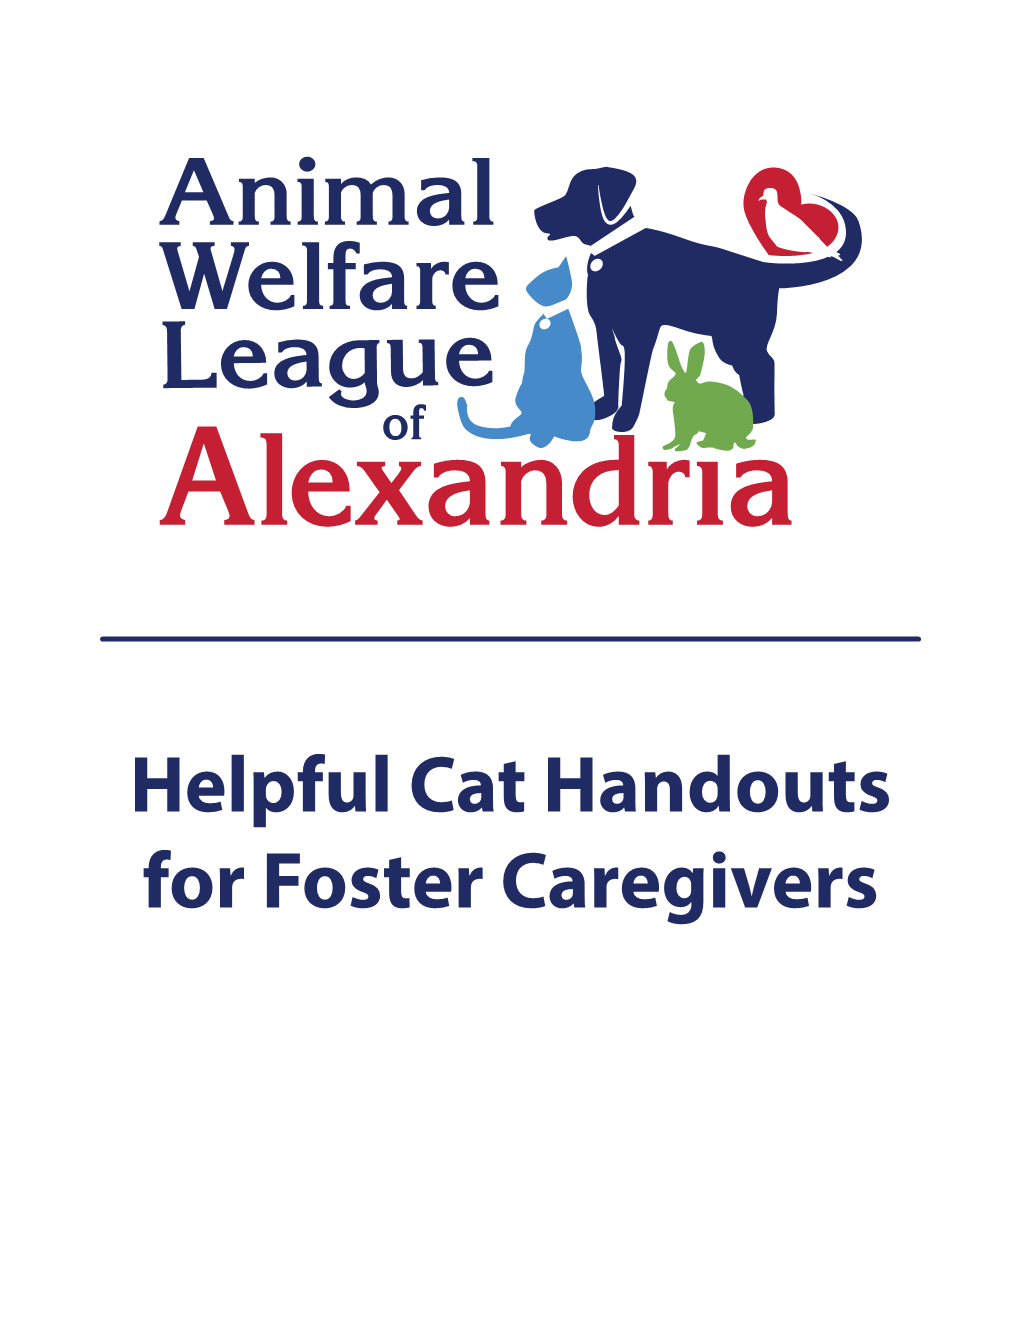 Helpful Cat Handouts for Foster Caregivers